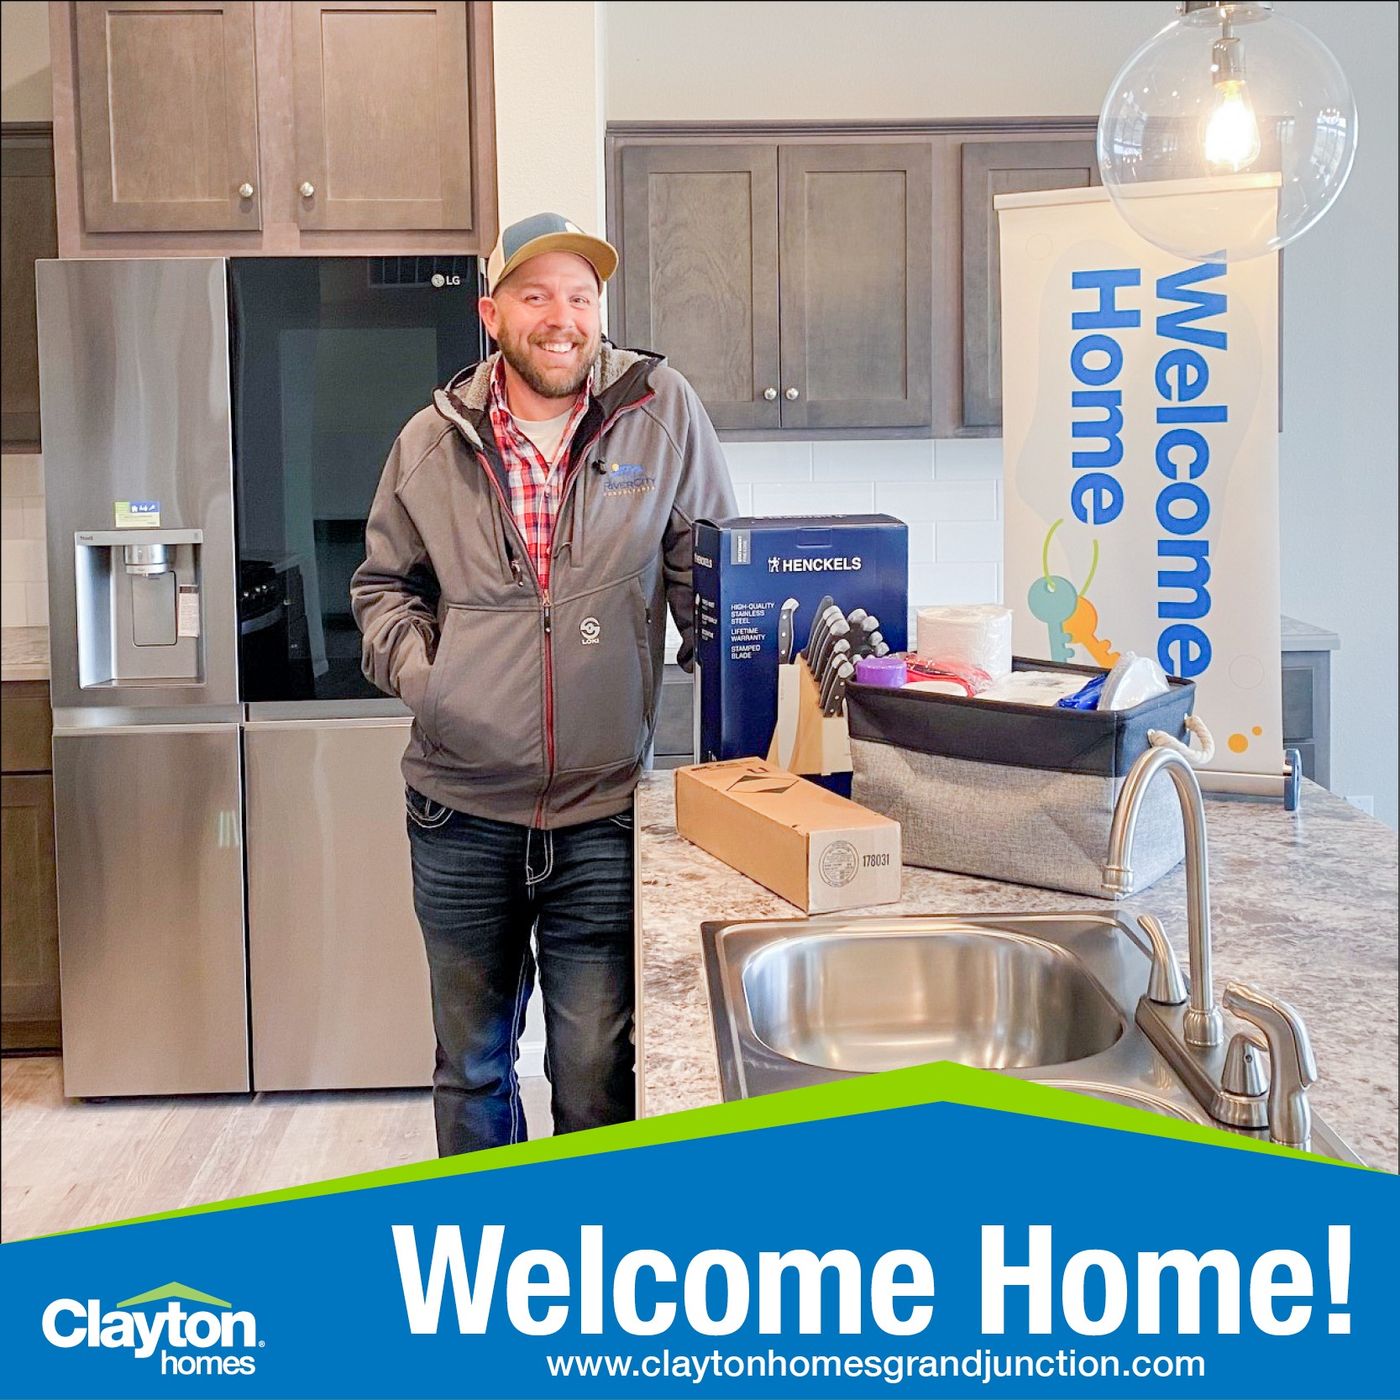 Craig R. welcome home image